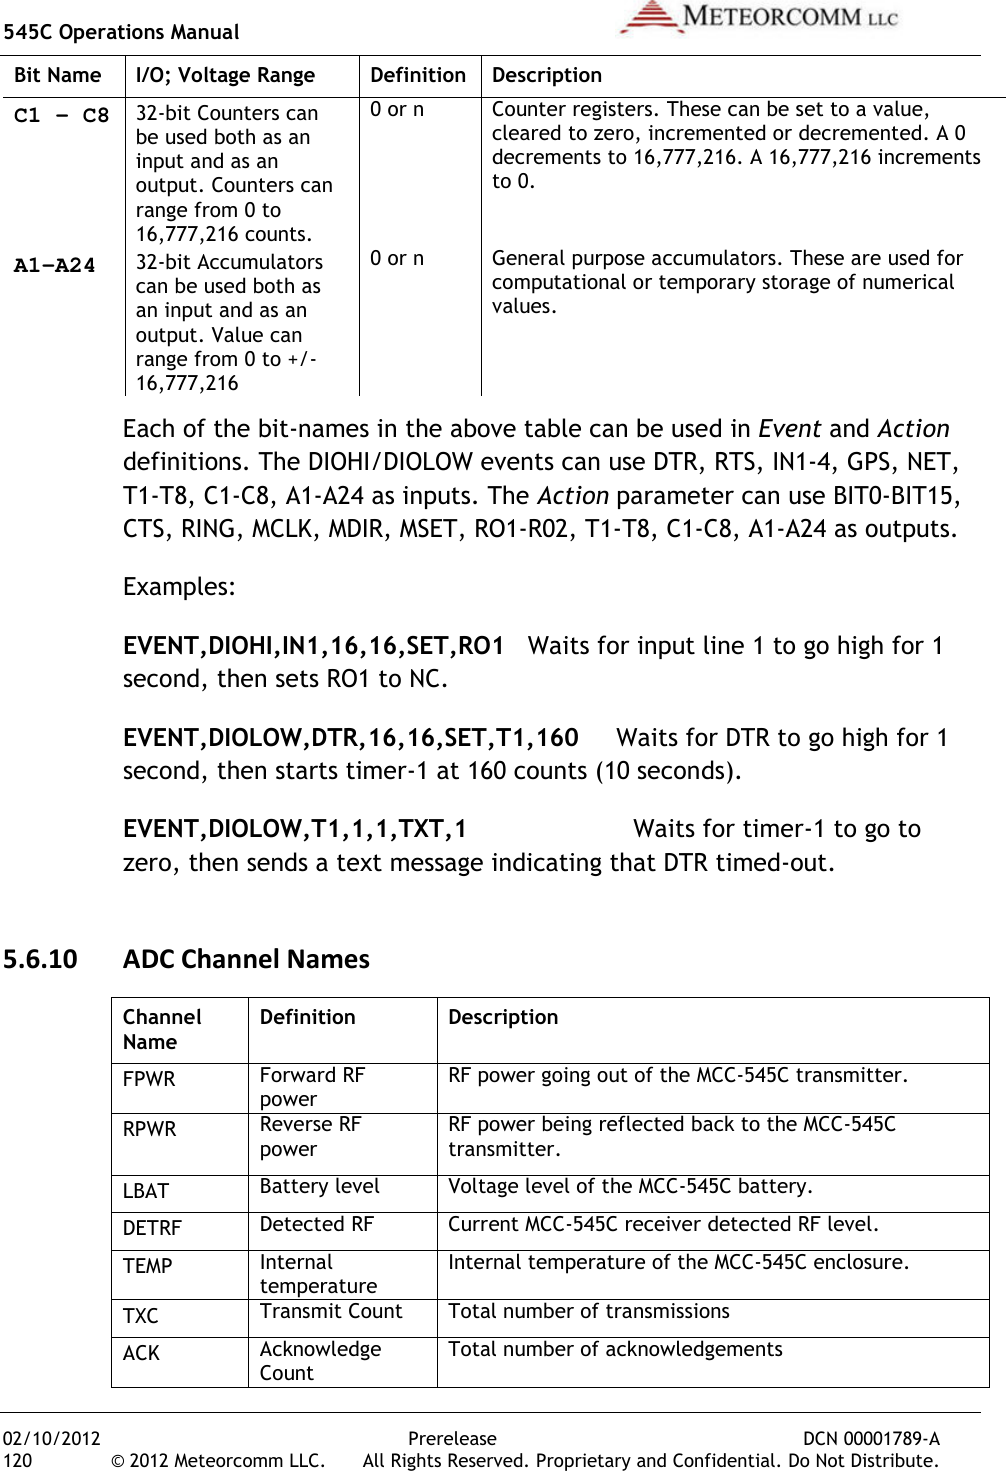 545C Operations Manual   02/10/2012  Prerelease  DCN 00001789-A 120  © 2012 Meteorcomm LLC.   All Rights Reserved. Proprietary and Confidential. Do Not Distribute. Bit Name  I/O; Voltage Range  Definition  Description C1 – C8 32-bit Counters can be used both as an input and as an output. Counters can range from 0 to 16,777,216 counts. 0 or n Counter registers. These can be set to a value, cleared to zero, incremented or decremented. A 0 decrements to 16,777,216. A 16,777,216 increments to 0. A1-A24 32-bit Accumulators can be used both as an input and as an output. Value can range from 0 to +/-16,777,216  0 or n General purpose accumulators. These are used for computational or temporary storage of numerical values. Each of the bit-names in the above table can be used in Event and Action definitions. The DIOHI/DIOLOW events can use DTR, RTS, IN1-4, GPS, NET, T1-T8, C1-C8, A1-A24 as inputs. The Action parameter can use BIT0-BIT15, CTS, RING, MCLK, MDIR, MSET, RO1-R02, T1-T8, C1-C8, A1-A24 as outputs. Examples: EVENT,DIOHI,IN1,16,16,SET,RO1  Waits for input line 1 to go high for 1 second, then sets RO1 to NC. EVENT,DIOLOW,DTR,16,16,SET,T1,160     Waits for DTR to go high for 1 second, then starts timer-1 at 160 counts (10 seconds). EVENT,DIOLOW,T1,1,1,TXT,1                      Waits for timer-1 to go to zero, then sends a text message indicating that DTR timed-out. 5.6.10 ADC Channel Names Channel Name Definition  Description FPWR Forward RF power RF power going out of the MCC-545C transmitter. RPWR Reverse RF power RF power being reflected back to the MCC-545C transmitter. LBAT Battery level Voltage level of the MCC-545C battery. DETRF Detected RF Current MCC-545C receiver detected RF level. TEMP Internal temperature Internal temperature of the MCC-545C enclosure. TXC Transmit Count Total number of transmissions ACK Acknowledge Count Total number of acknowledgements 